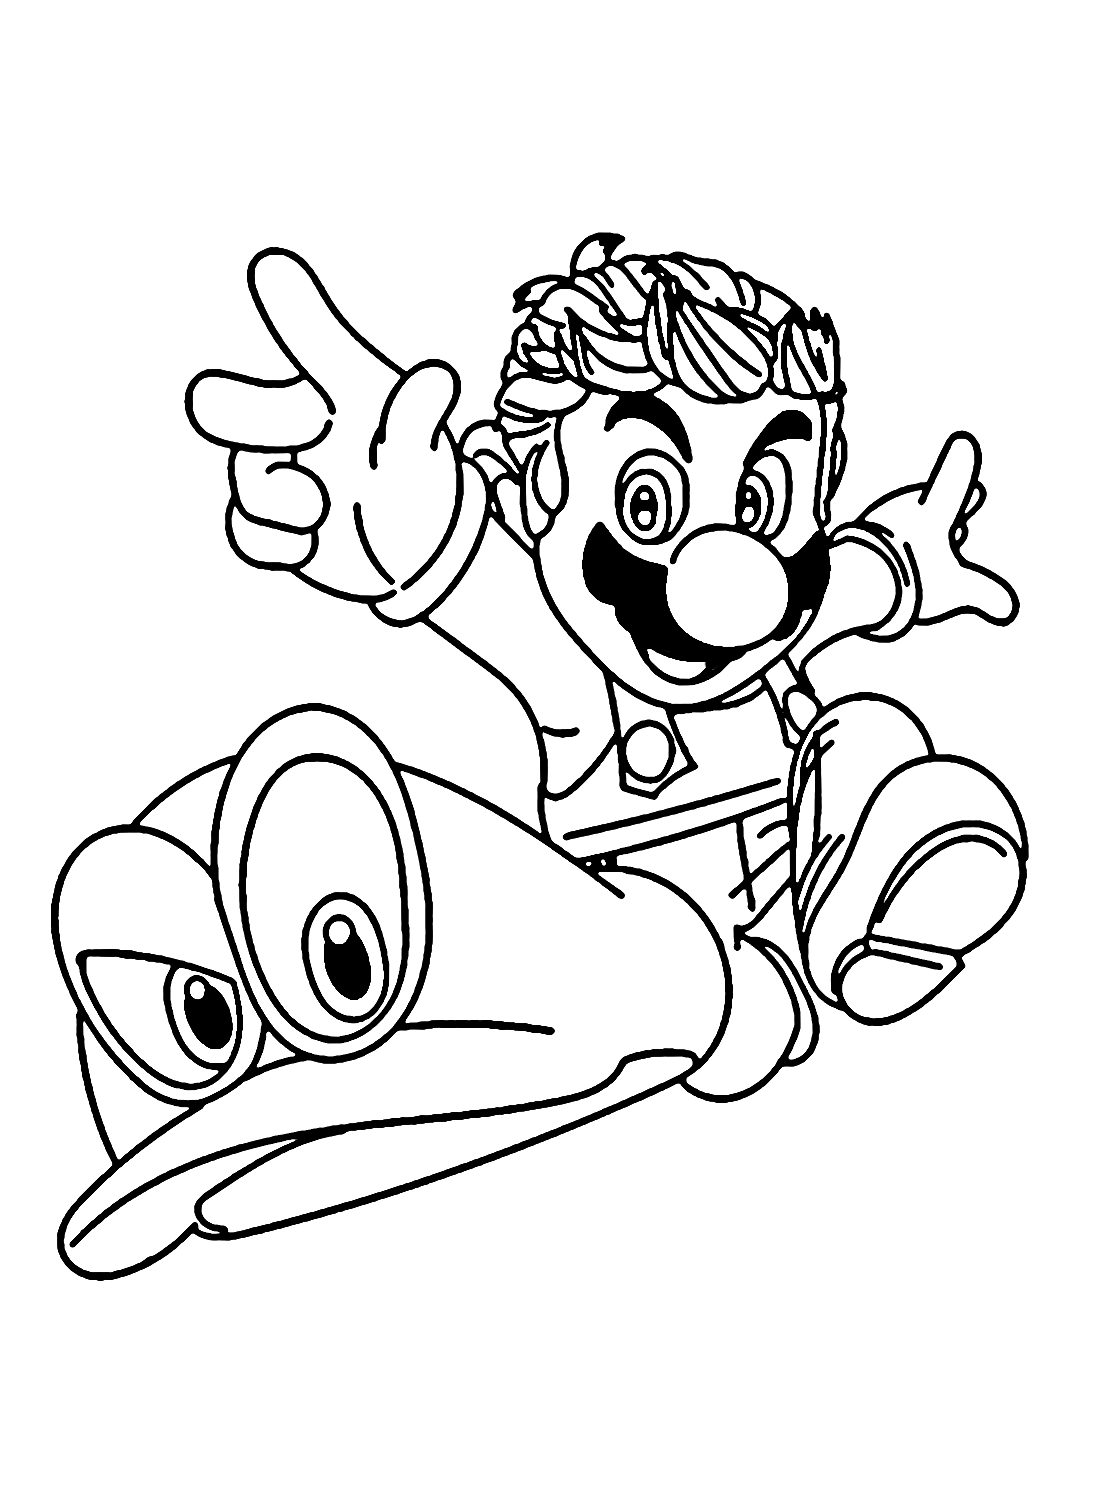 Super Mario Odyssey Coloring Pages ...